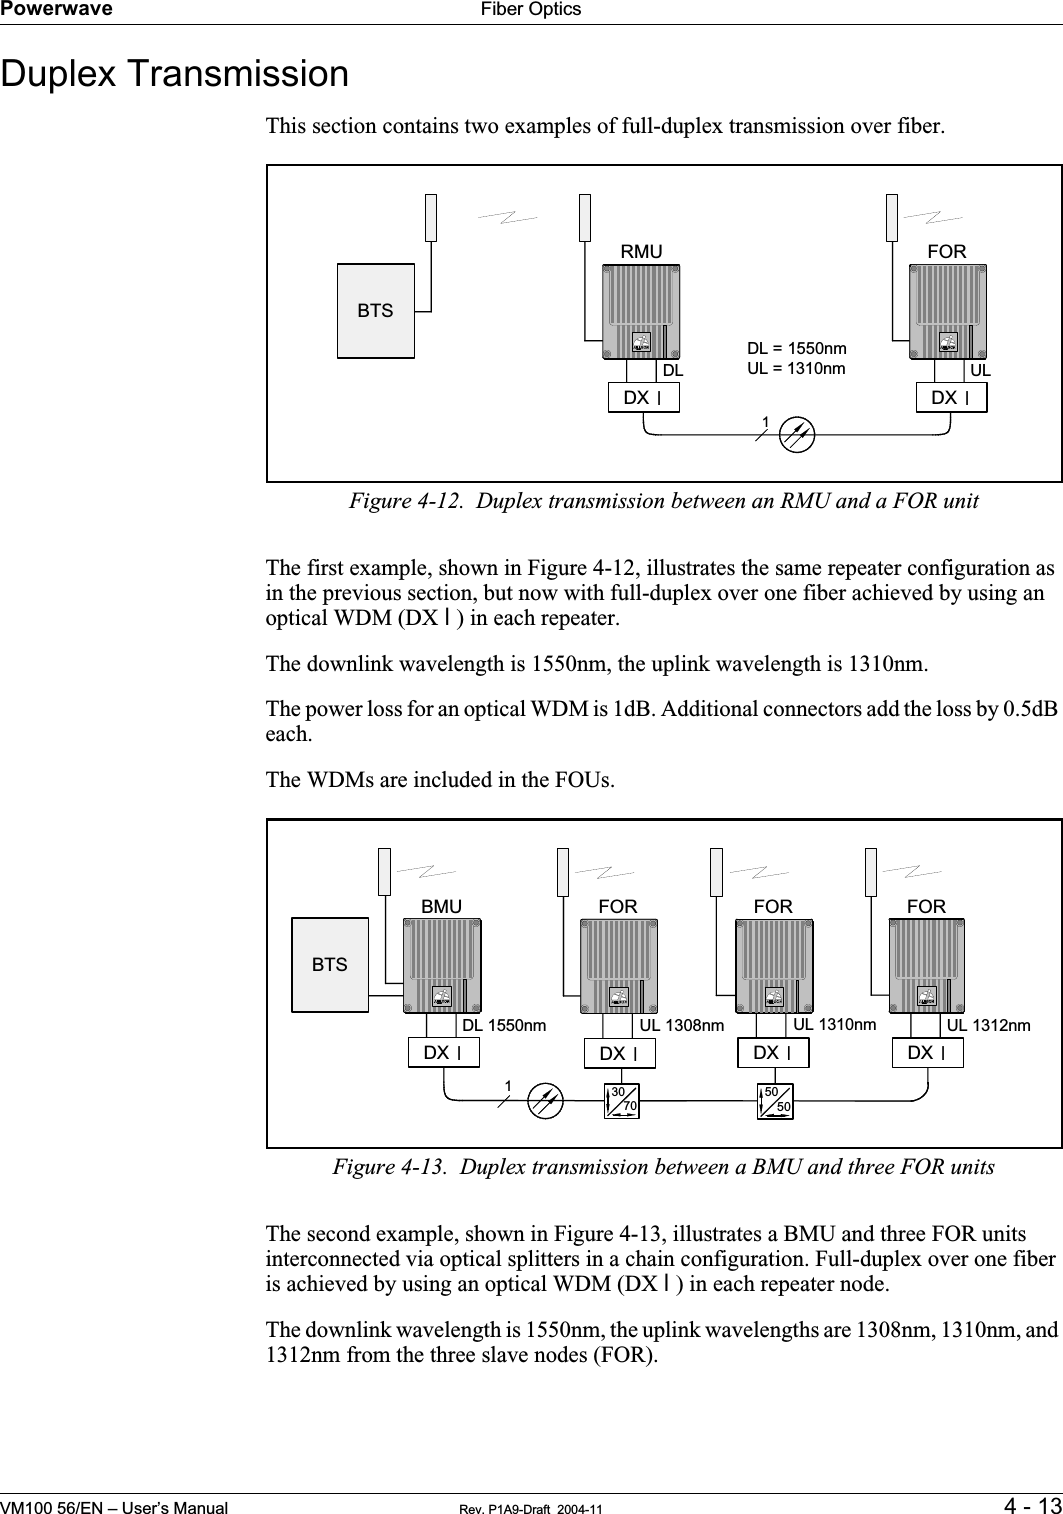 Powerwave Fiber OpticsVM100 56/EN – User’s Manual Rev. P1A9-Draft  2004-11 4 - 13Duplex TransmissionThis section contains two examples of full-duplex transmission over fiber.Figure 4-12.  Duplex transmission between an RMU and a FOR unitThe first example, shown in Figure 4-12, illustrates the same repeater configuration as in the previous section, but now with full-duplex over one fiber achieved by using an optical WDM (DX O) in each repeater.The downlink wavelength is 1550nm, the uplink wavelength is 1310nm.The power loss for an optical WDM is 1dB. Additional connectors add the loss by 0.5dB each.The WDMs are included in the FOUs.Figure 4-13.  Duplex transmission between a BMU and three FOR unitsThe second example, shown in Figure 4-13, illustrates a BMU and three FOR units interconnected via optical splitters in a chain configuration. Full-duplex over one fiber is achieved by using an optical WDM (DX O) in each repeater node.The downlink wavelength is 1550nm, the uplink wavelengths are 1308nm, 1310nm, and 1312nm from the three slave nodes (FOR).1RMU FORDL ULBTSDL = 1550nmUL = 1310nmDX ODX O1BMUDL 1550nmBTSFORUL 1308nmFORUL 1310nm3070FORUL 1312nm DX ODX ODX ODX O5050